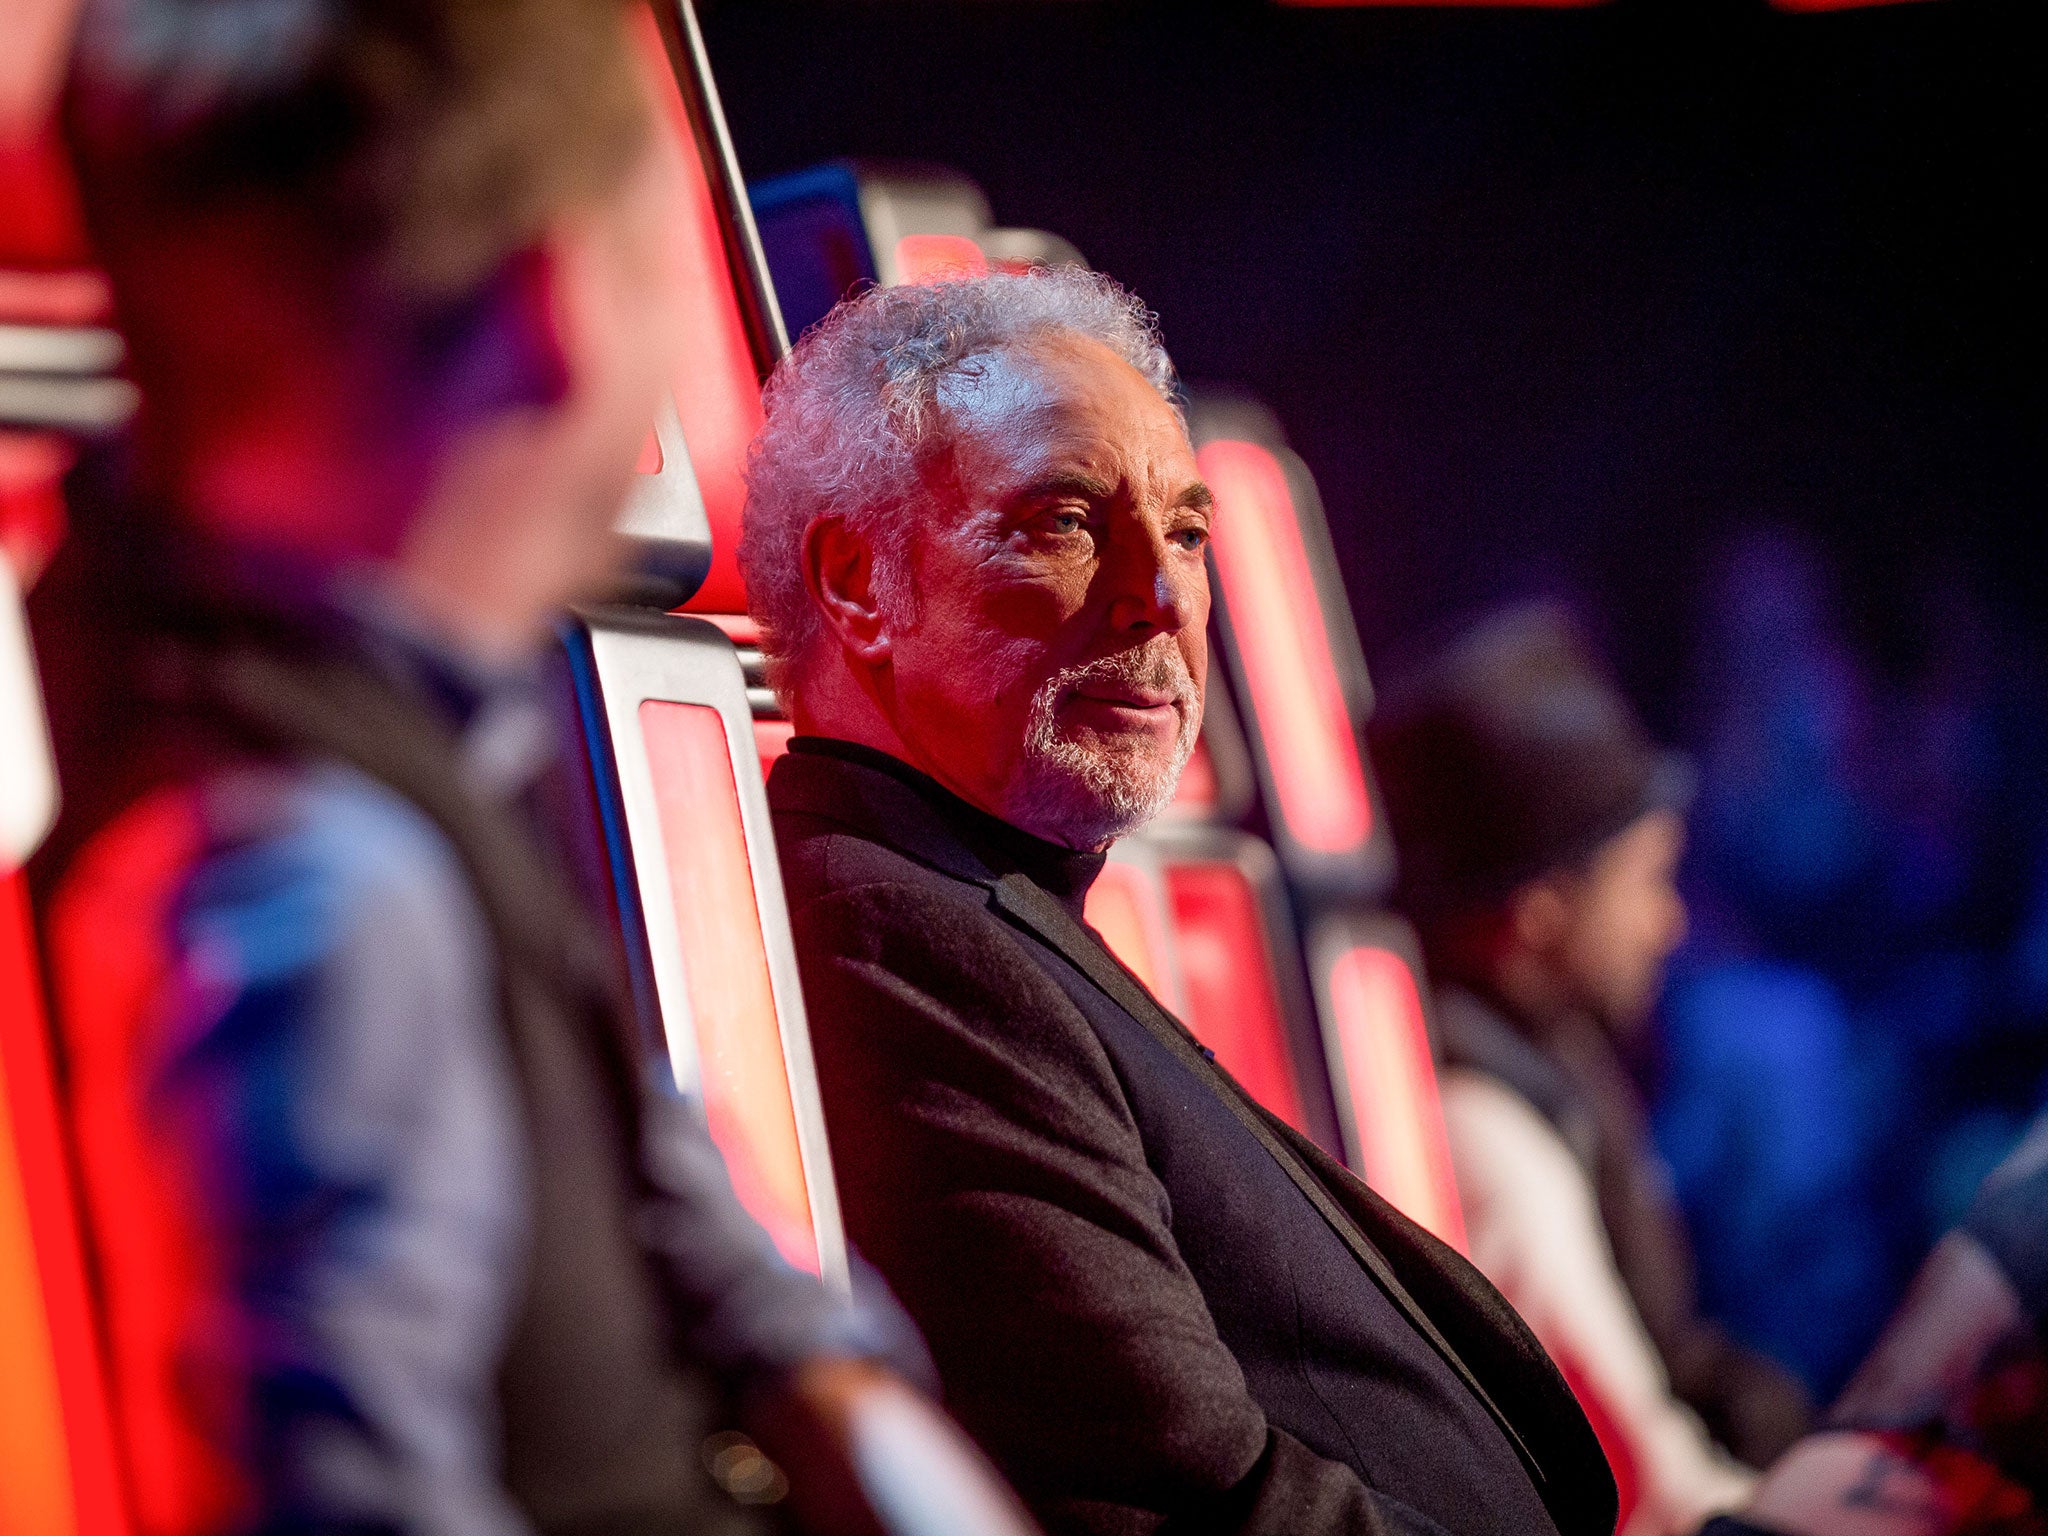 Tom Jones will not return as a judge on The Voice